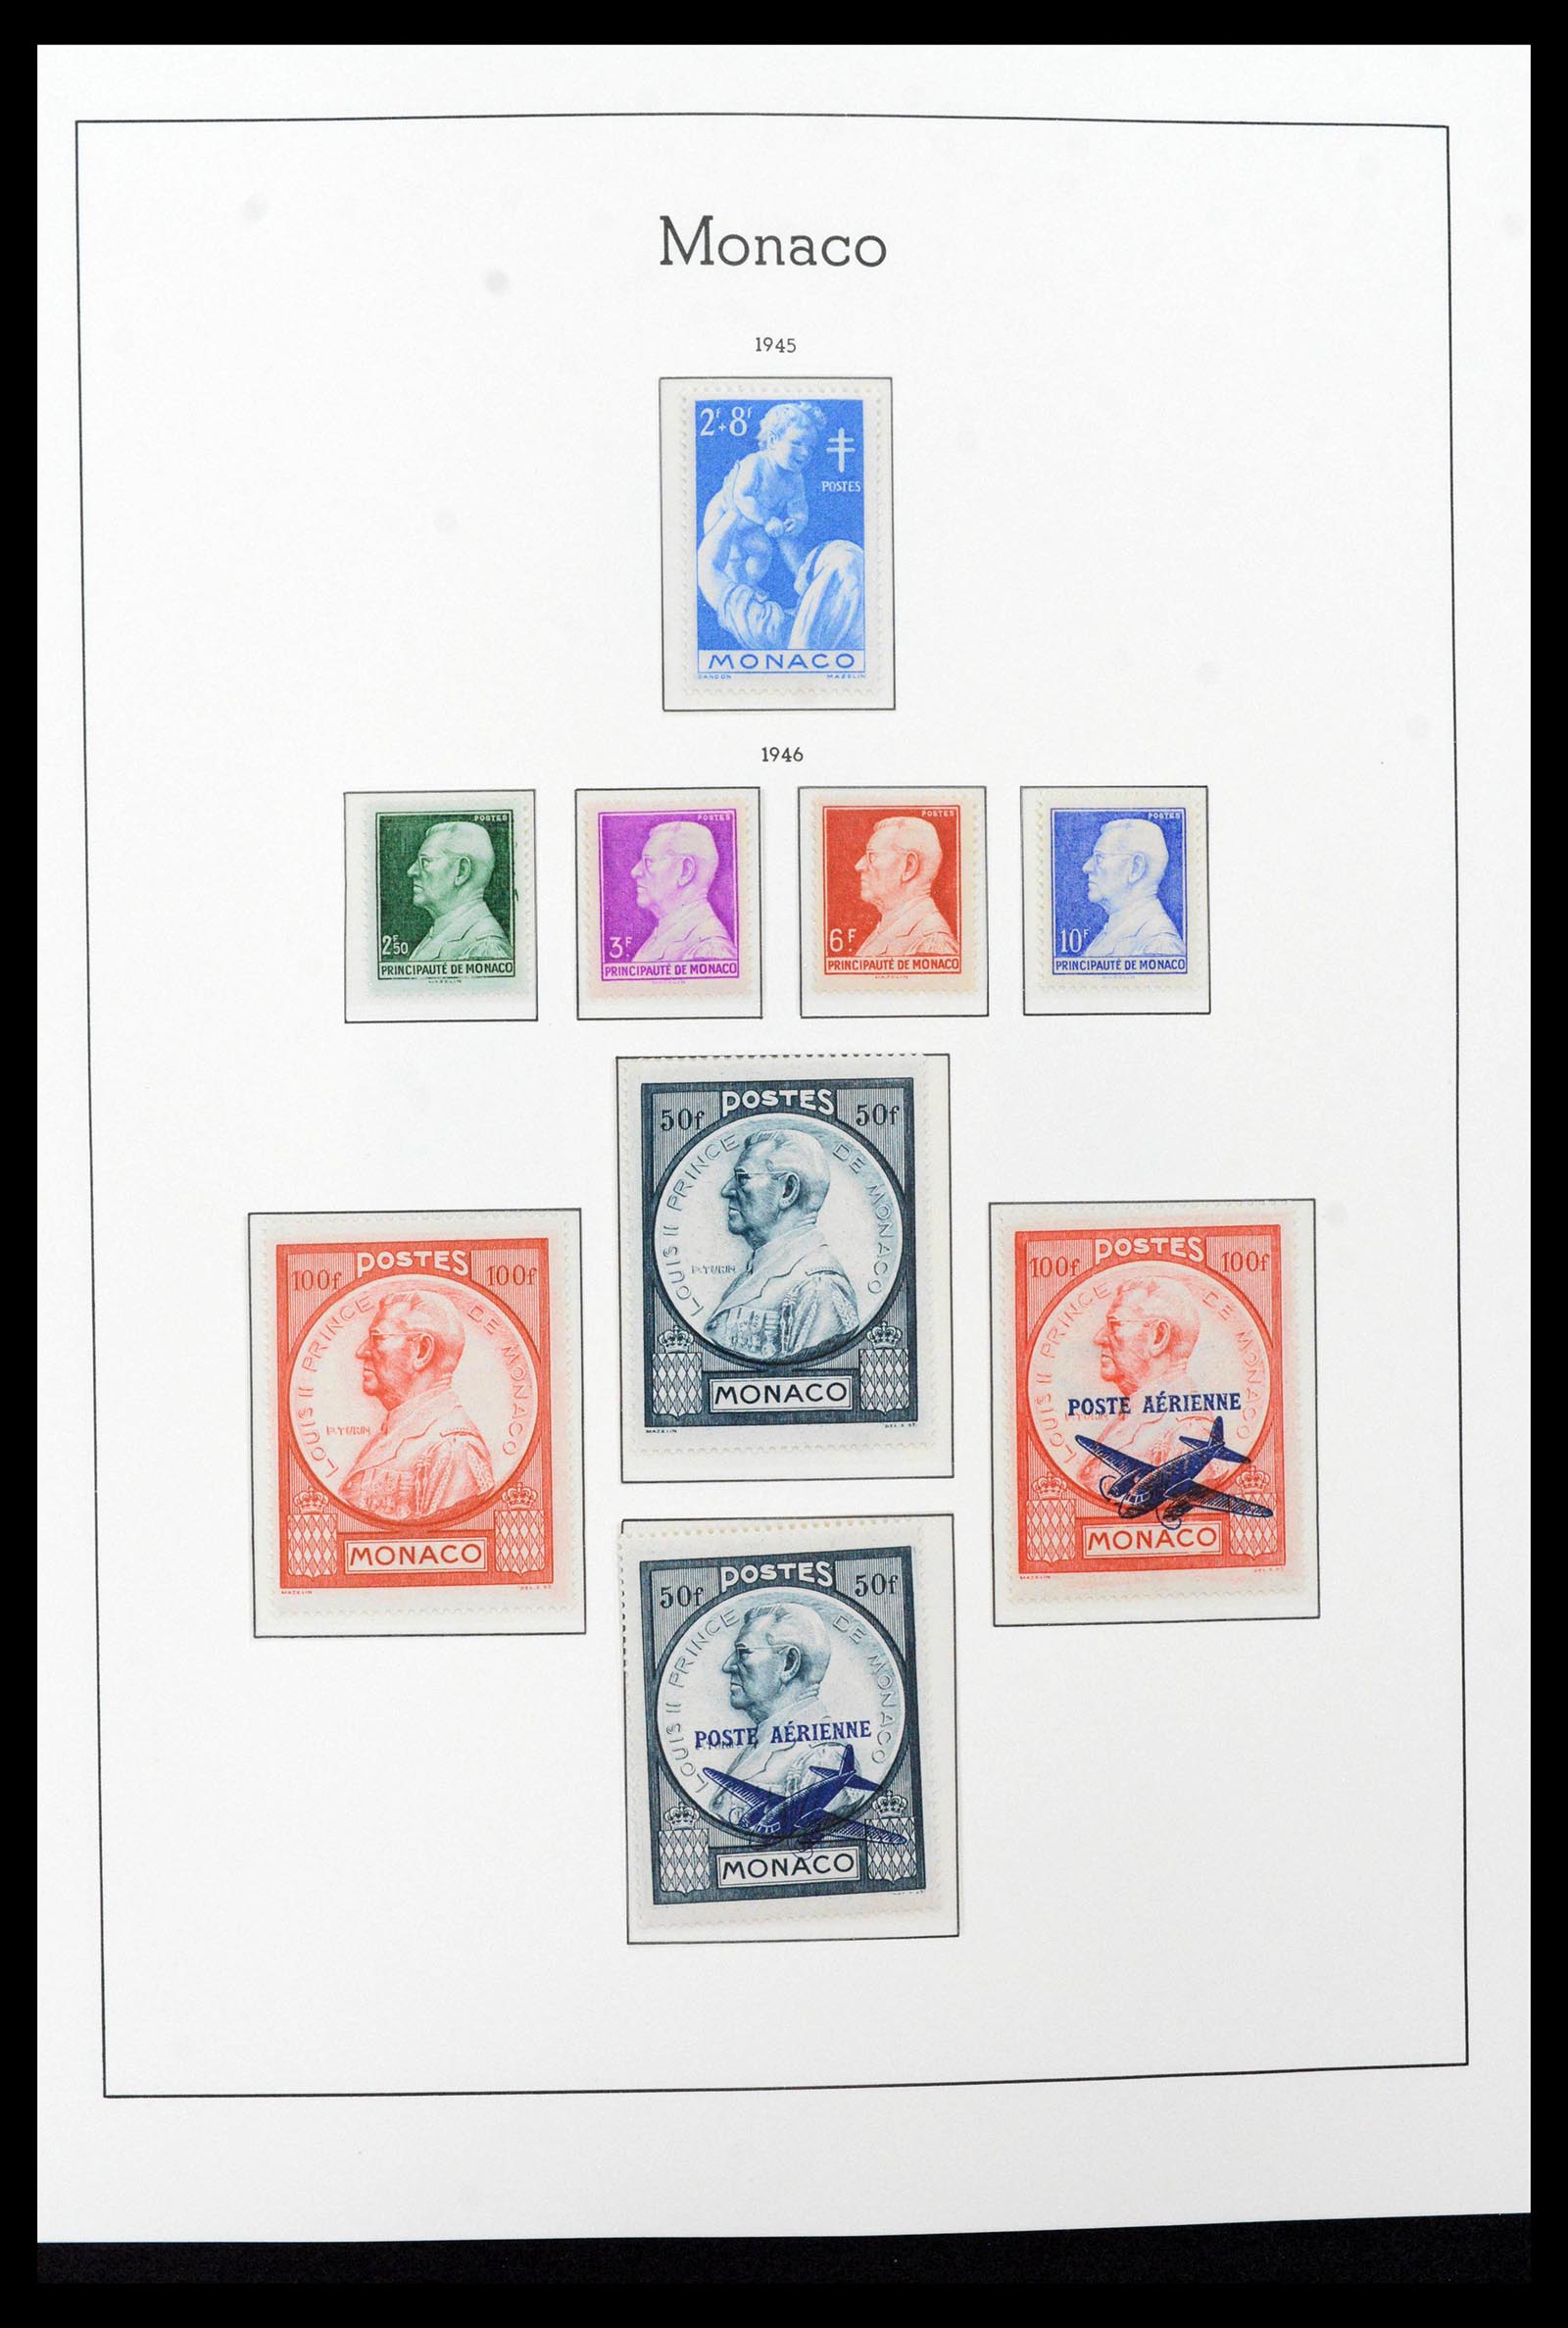 39390 0027 - Stamp collection 39390 Monaco complete 1885-1990.